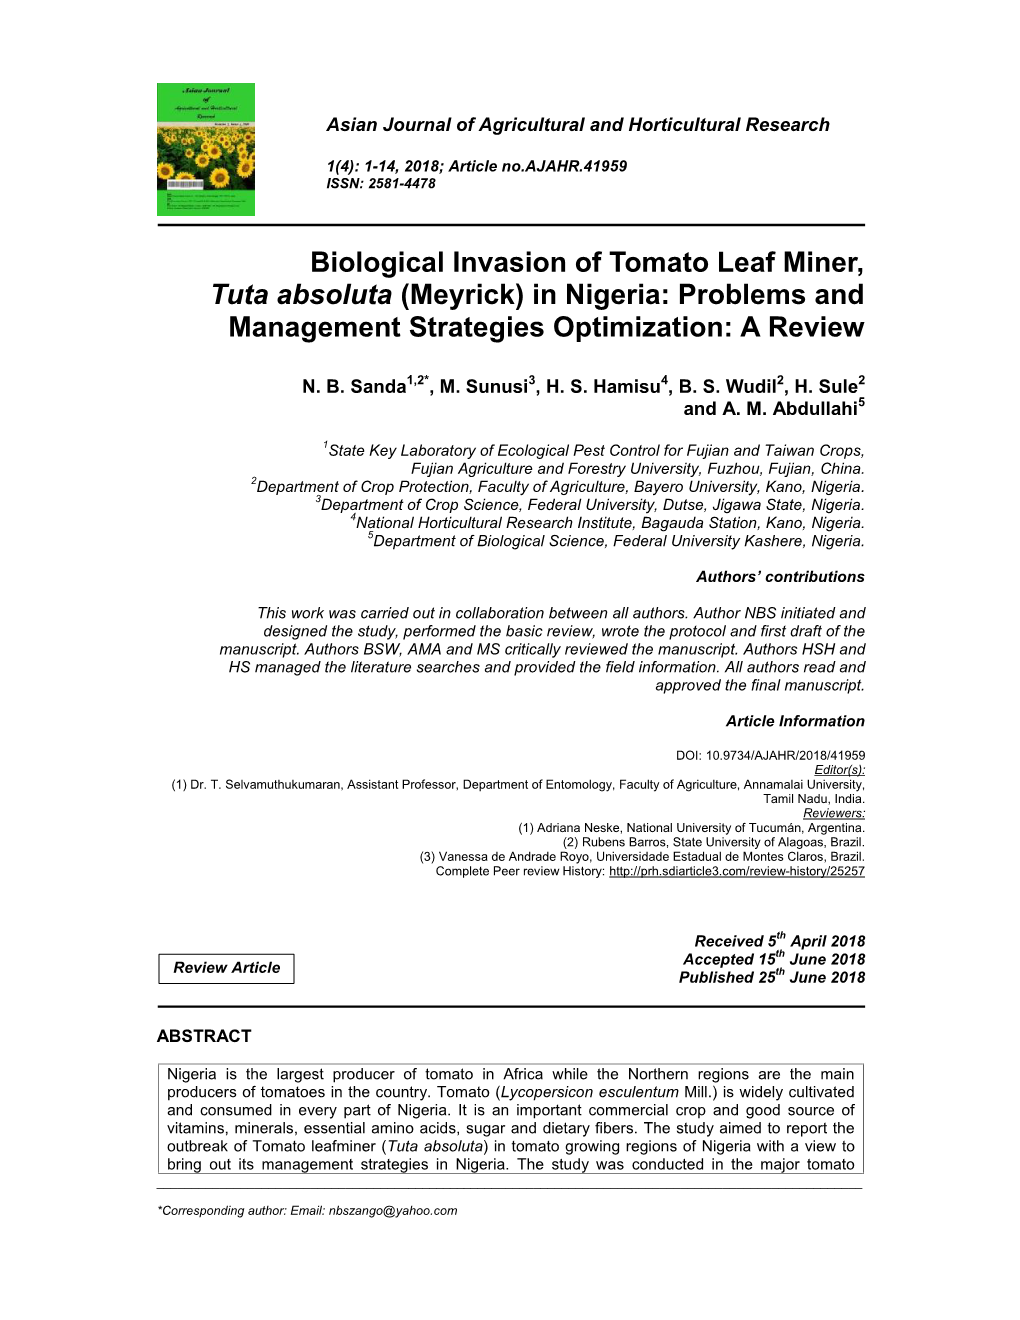 Biological Invasion of Tomato Leaf Miner, Tuta Absoluta (Meyrick) in Nigeria: Problems and Management Strategies Optimization: a Review